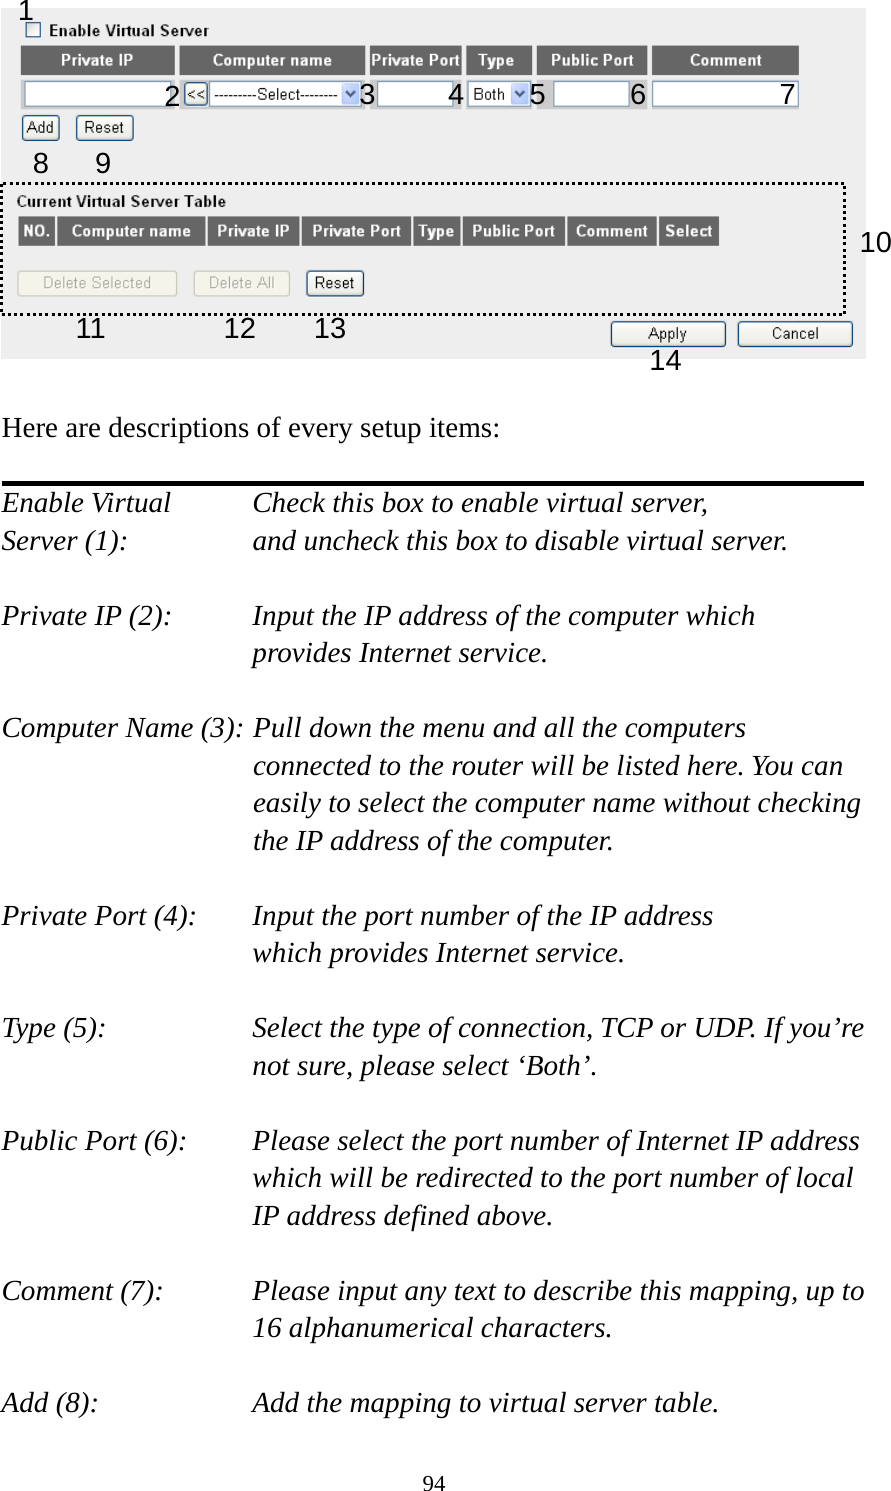 94   Here are descriptions of every setup items:  Enable Virtual      Check this box to enable virtual server, Server (1):       and uncheck this box to disable virtual server.  Private IP (2):      Input the IP address of the computer which      provides Internet service.  Computer Name (3): Pull down the menu and all the computers connected to the router will be listed here. You can easily to select the computer name without checking the IP address of the computer.  Private Port (4):    Input the port number of the IP address      which provides Internet service.  Type (5):    Select the type of connection, TCP or UDP. If you’re not sure, please select ‘Both’.  Public Port (6):    Please select the port number of Internet IP address which will be redirected to the port number of local IP address defined above.  Comment (7):    Please input any text to describe this mapping, up to 16 alphanumerical characters.  Add (8):        Add the mapping to virtual server table. 1 2  3 4 5 8 9 10 11 12 13 14 7 6 